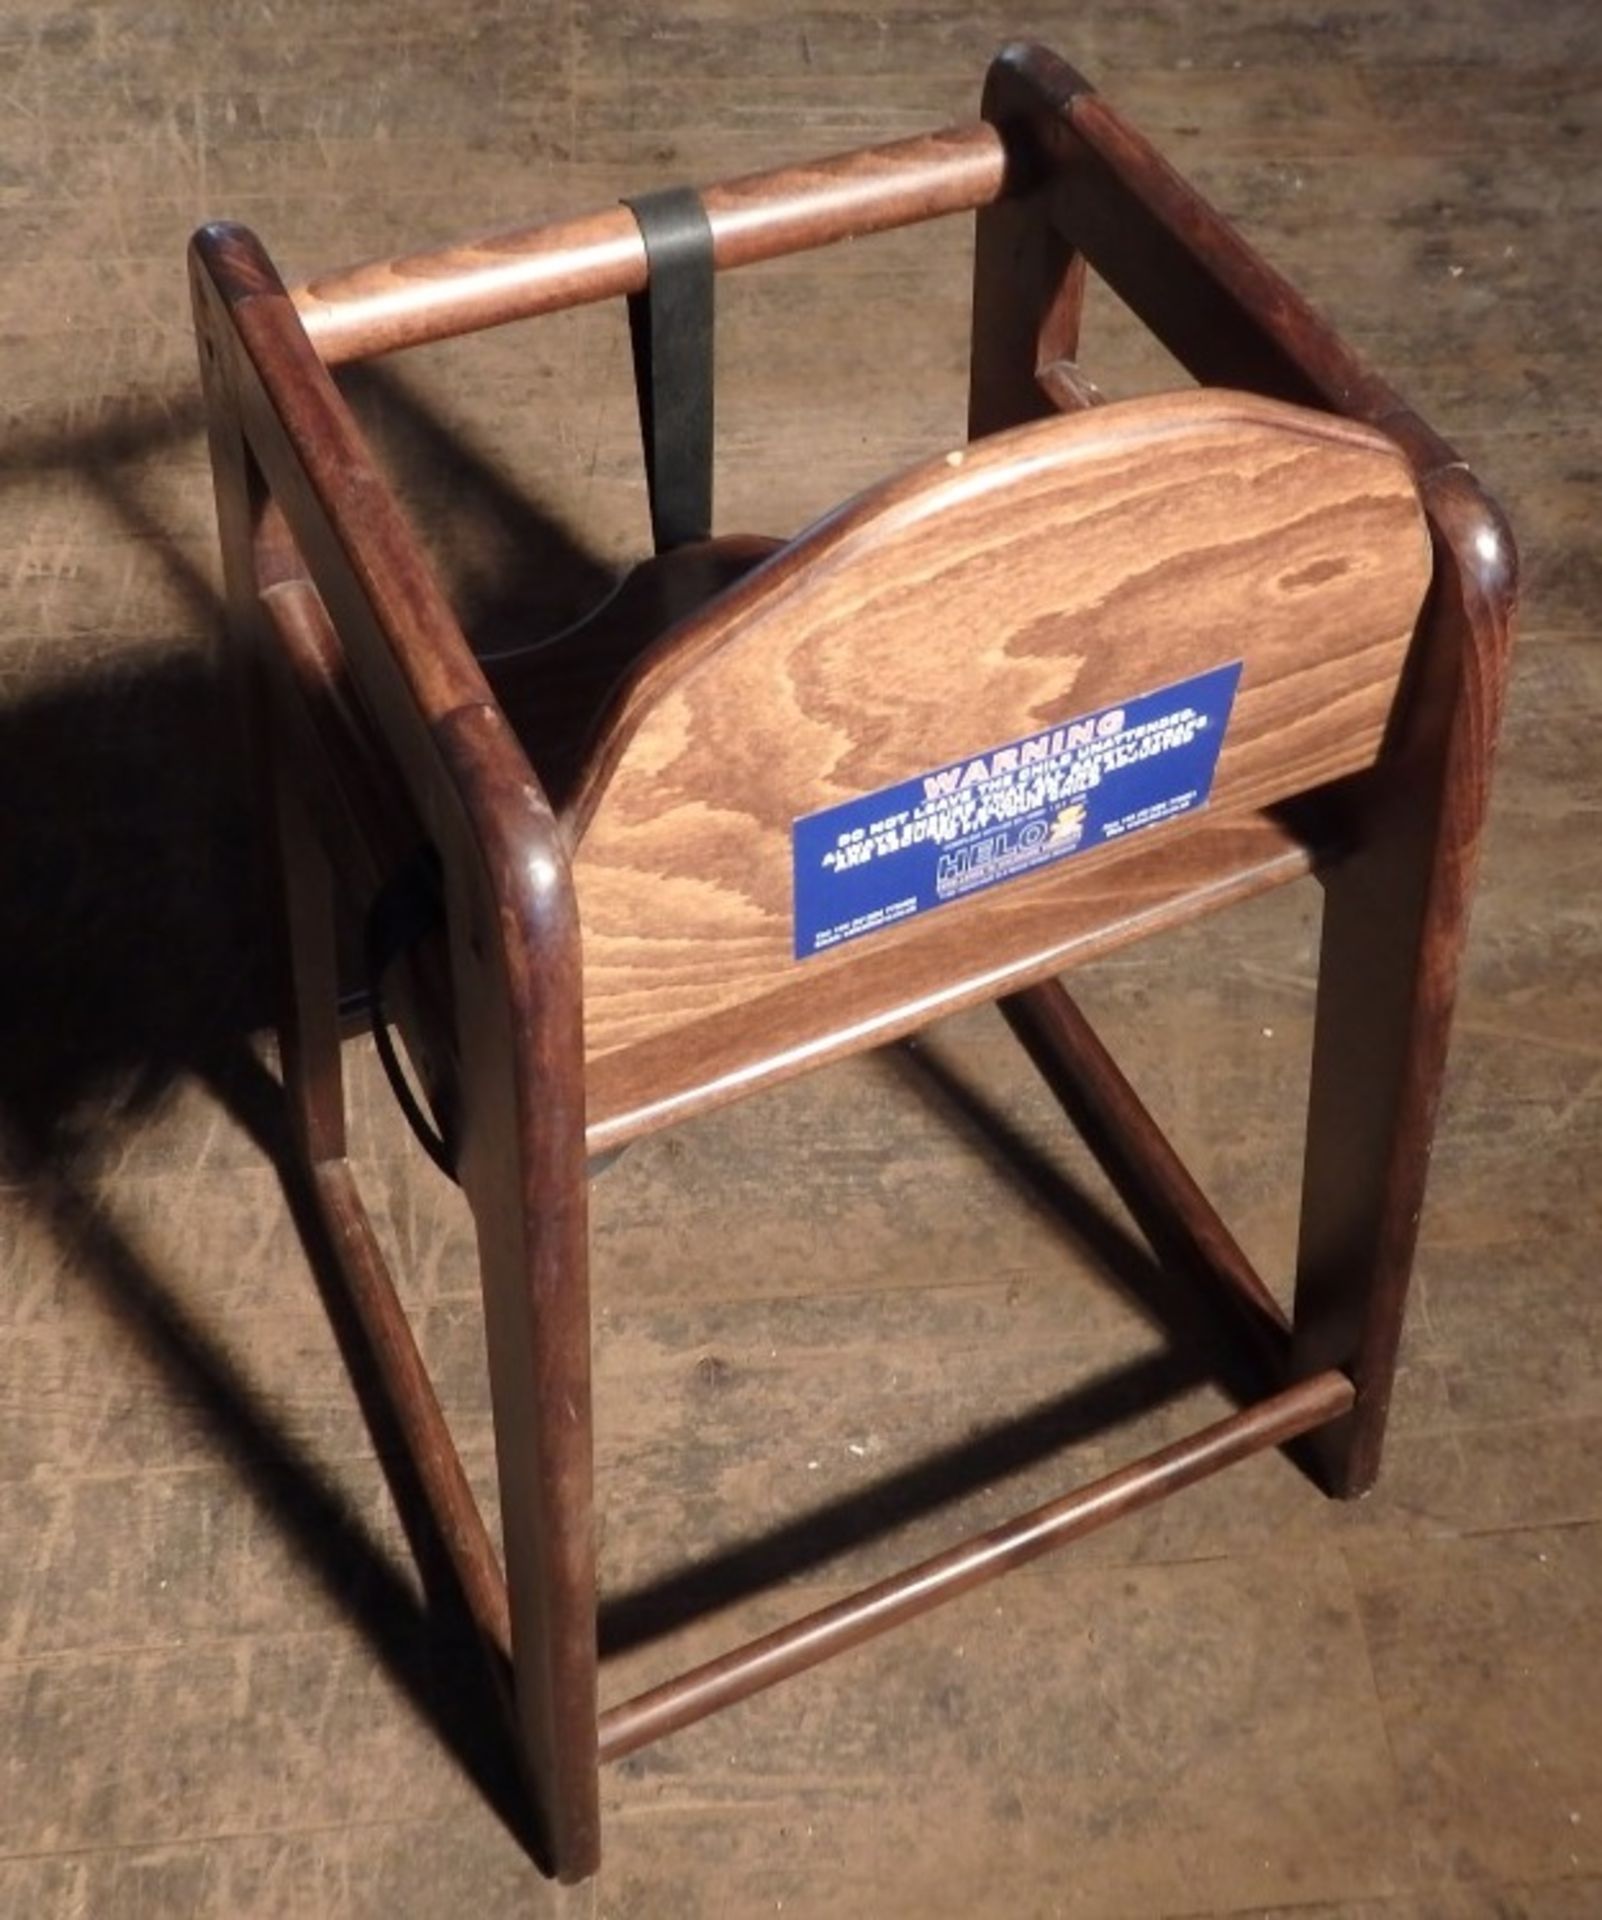 1 x Solid Wood Childs High Chair - All Recently Taken From A Bar & Restaurant Environment - - Image 7 of 8